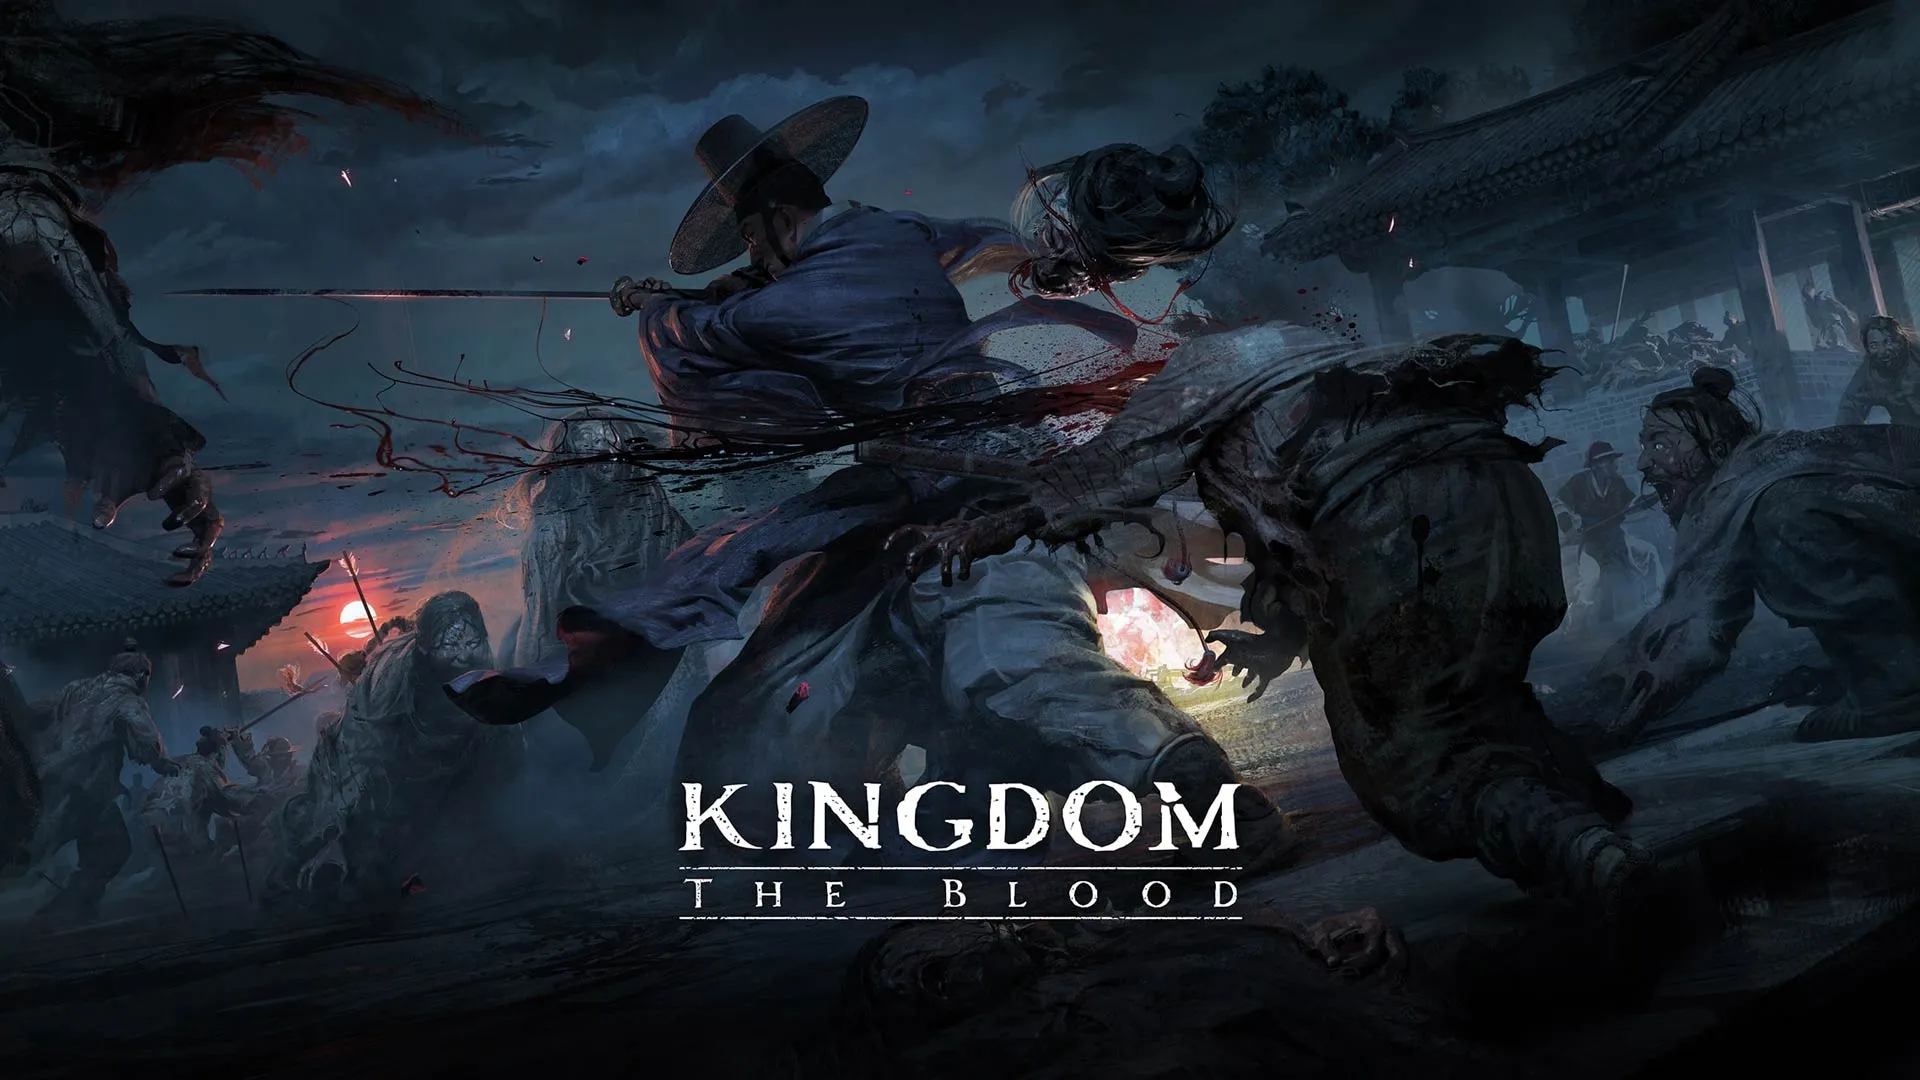 Kingdom: The Blood looks like Ghost of Tsushima with zombies